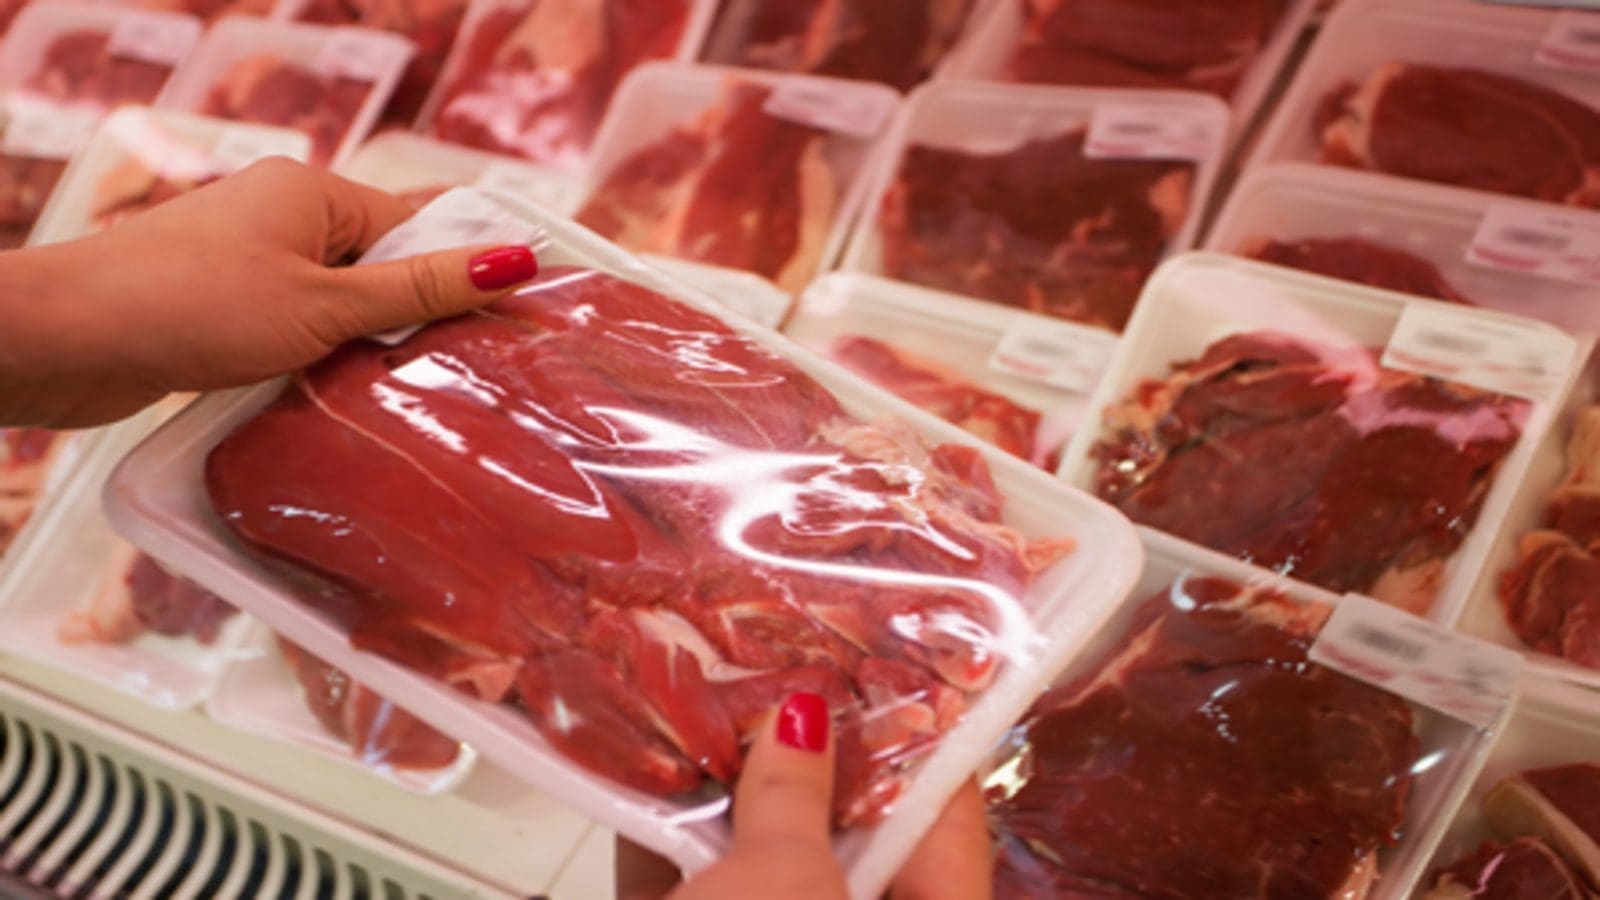 Saudi Arabia issues new regulations for meat exports